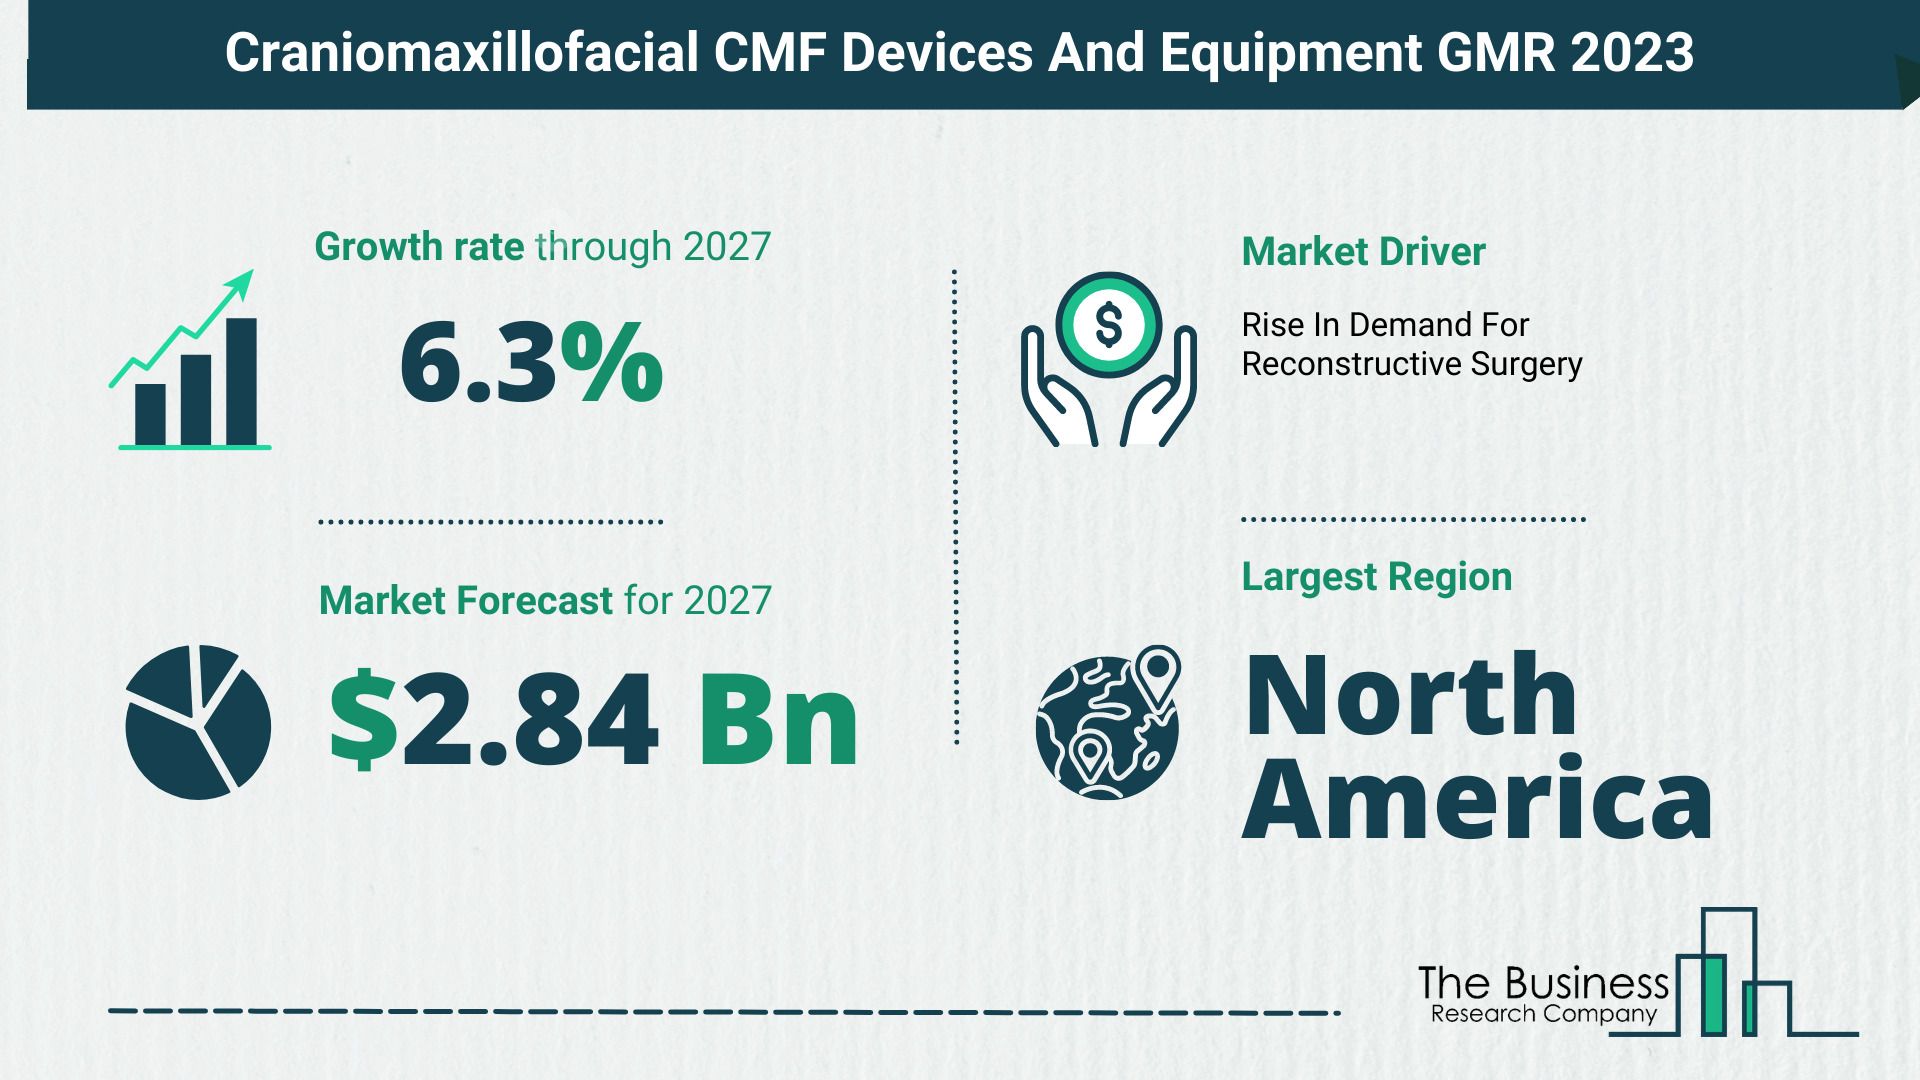 Global Craniomaxillofacial CMF Devices And Equipment Market Opportunities And Strategies 2023